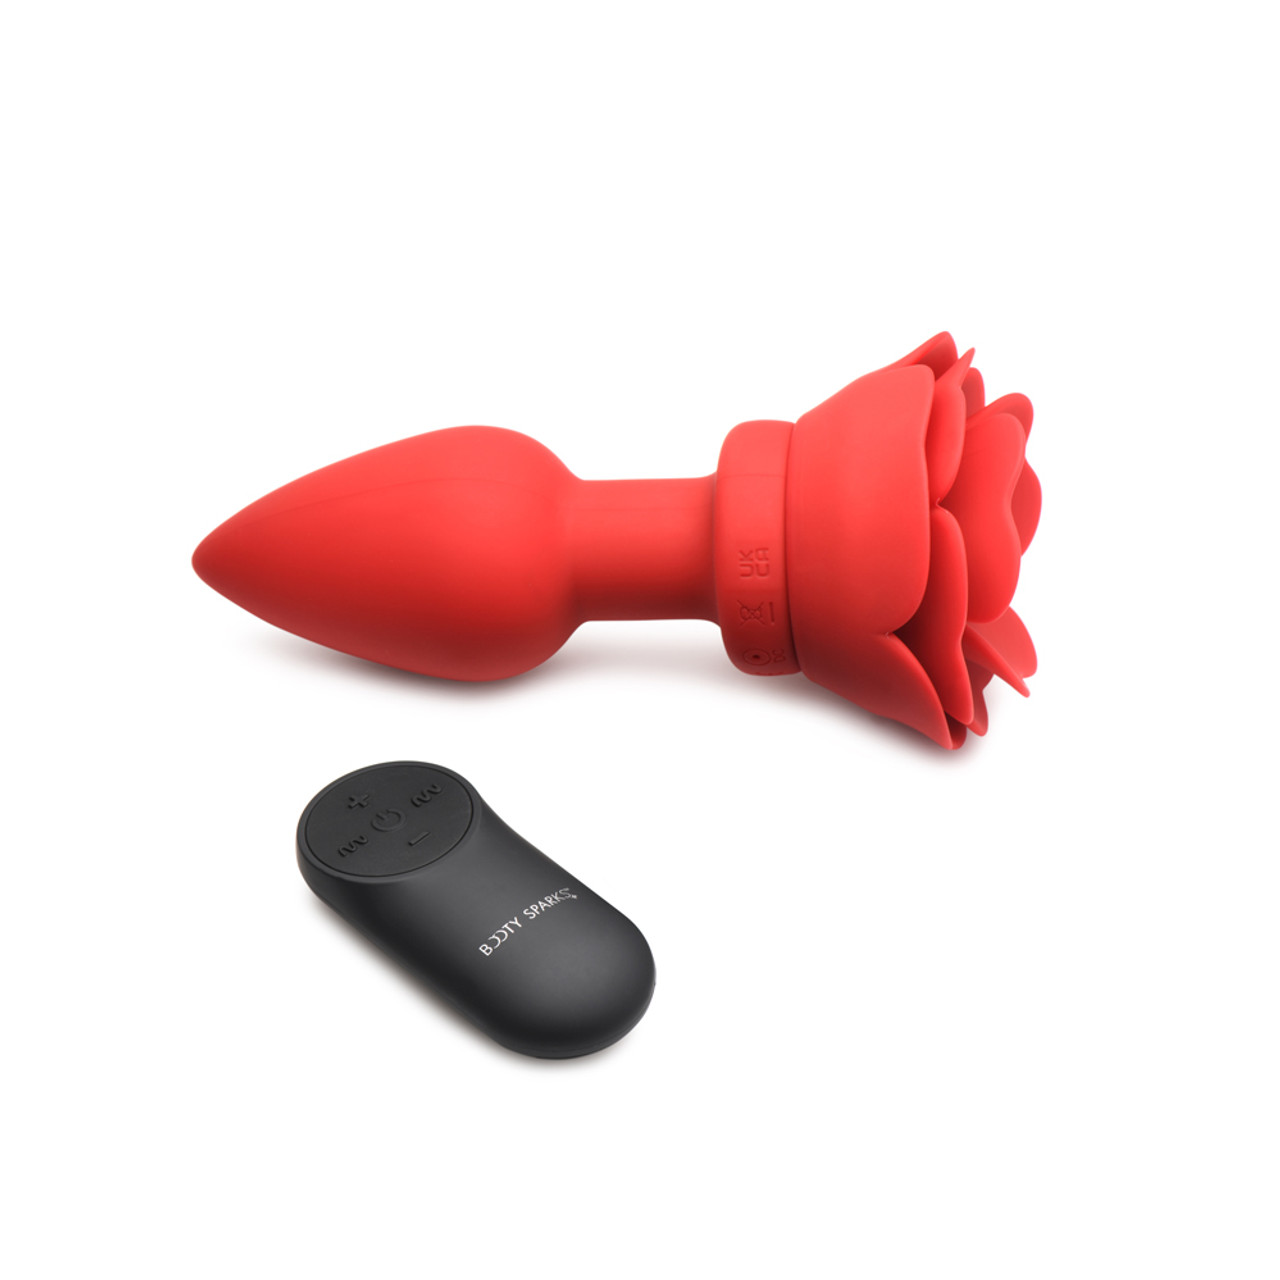 Buy the Booty Sparks Blooming Red Rose 11-Function Remote Control Rechargeable Vibrating Silicone Butt Plug